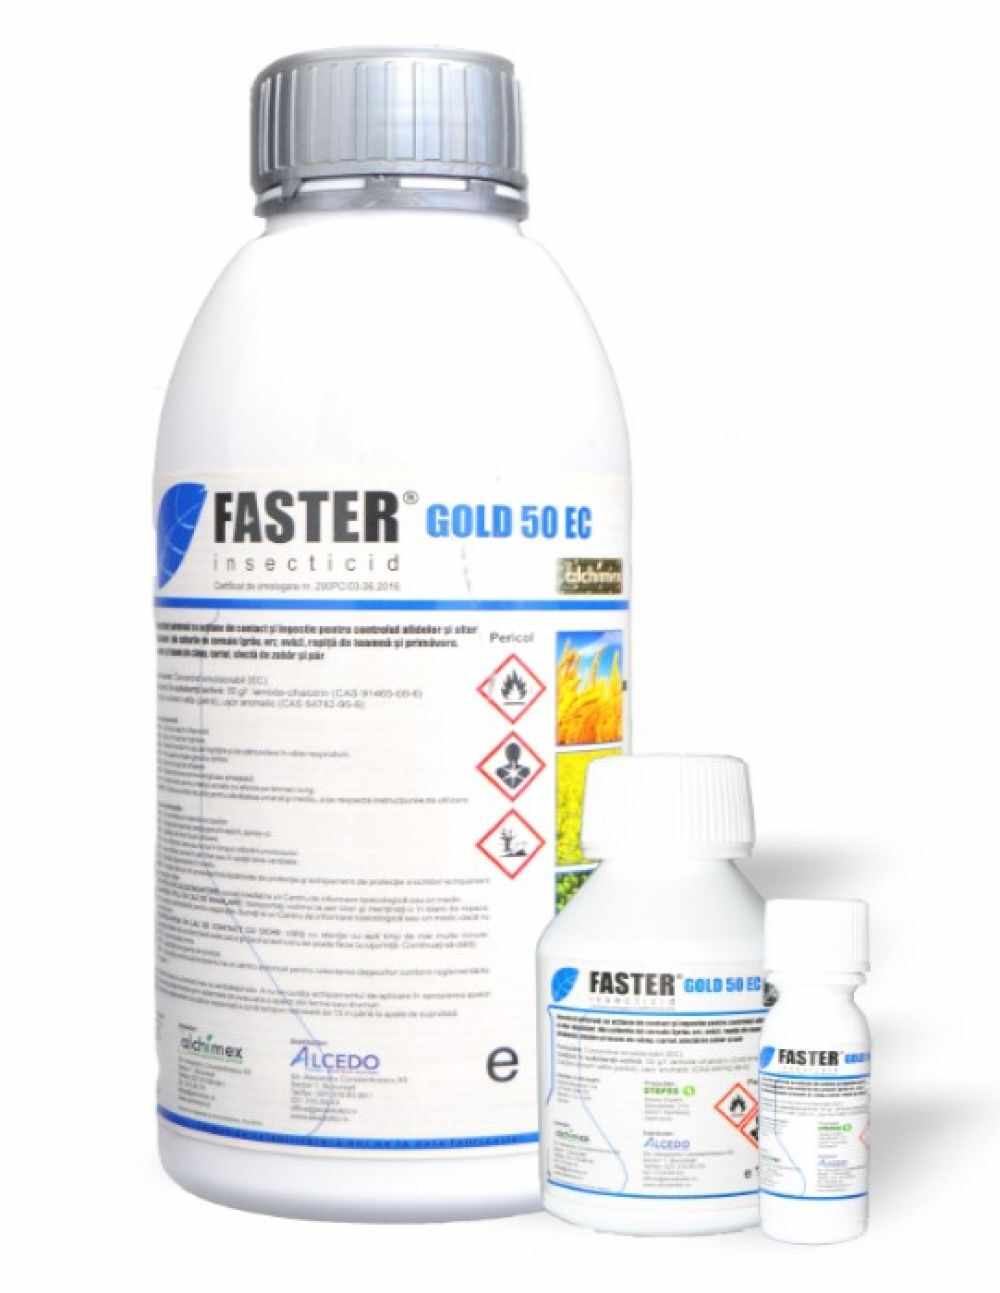 Insecticid Faster Gold 50 EC 1 l